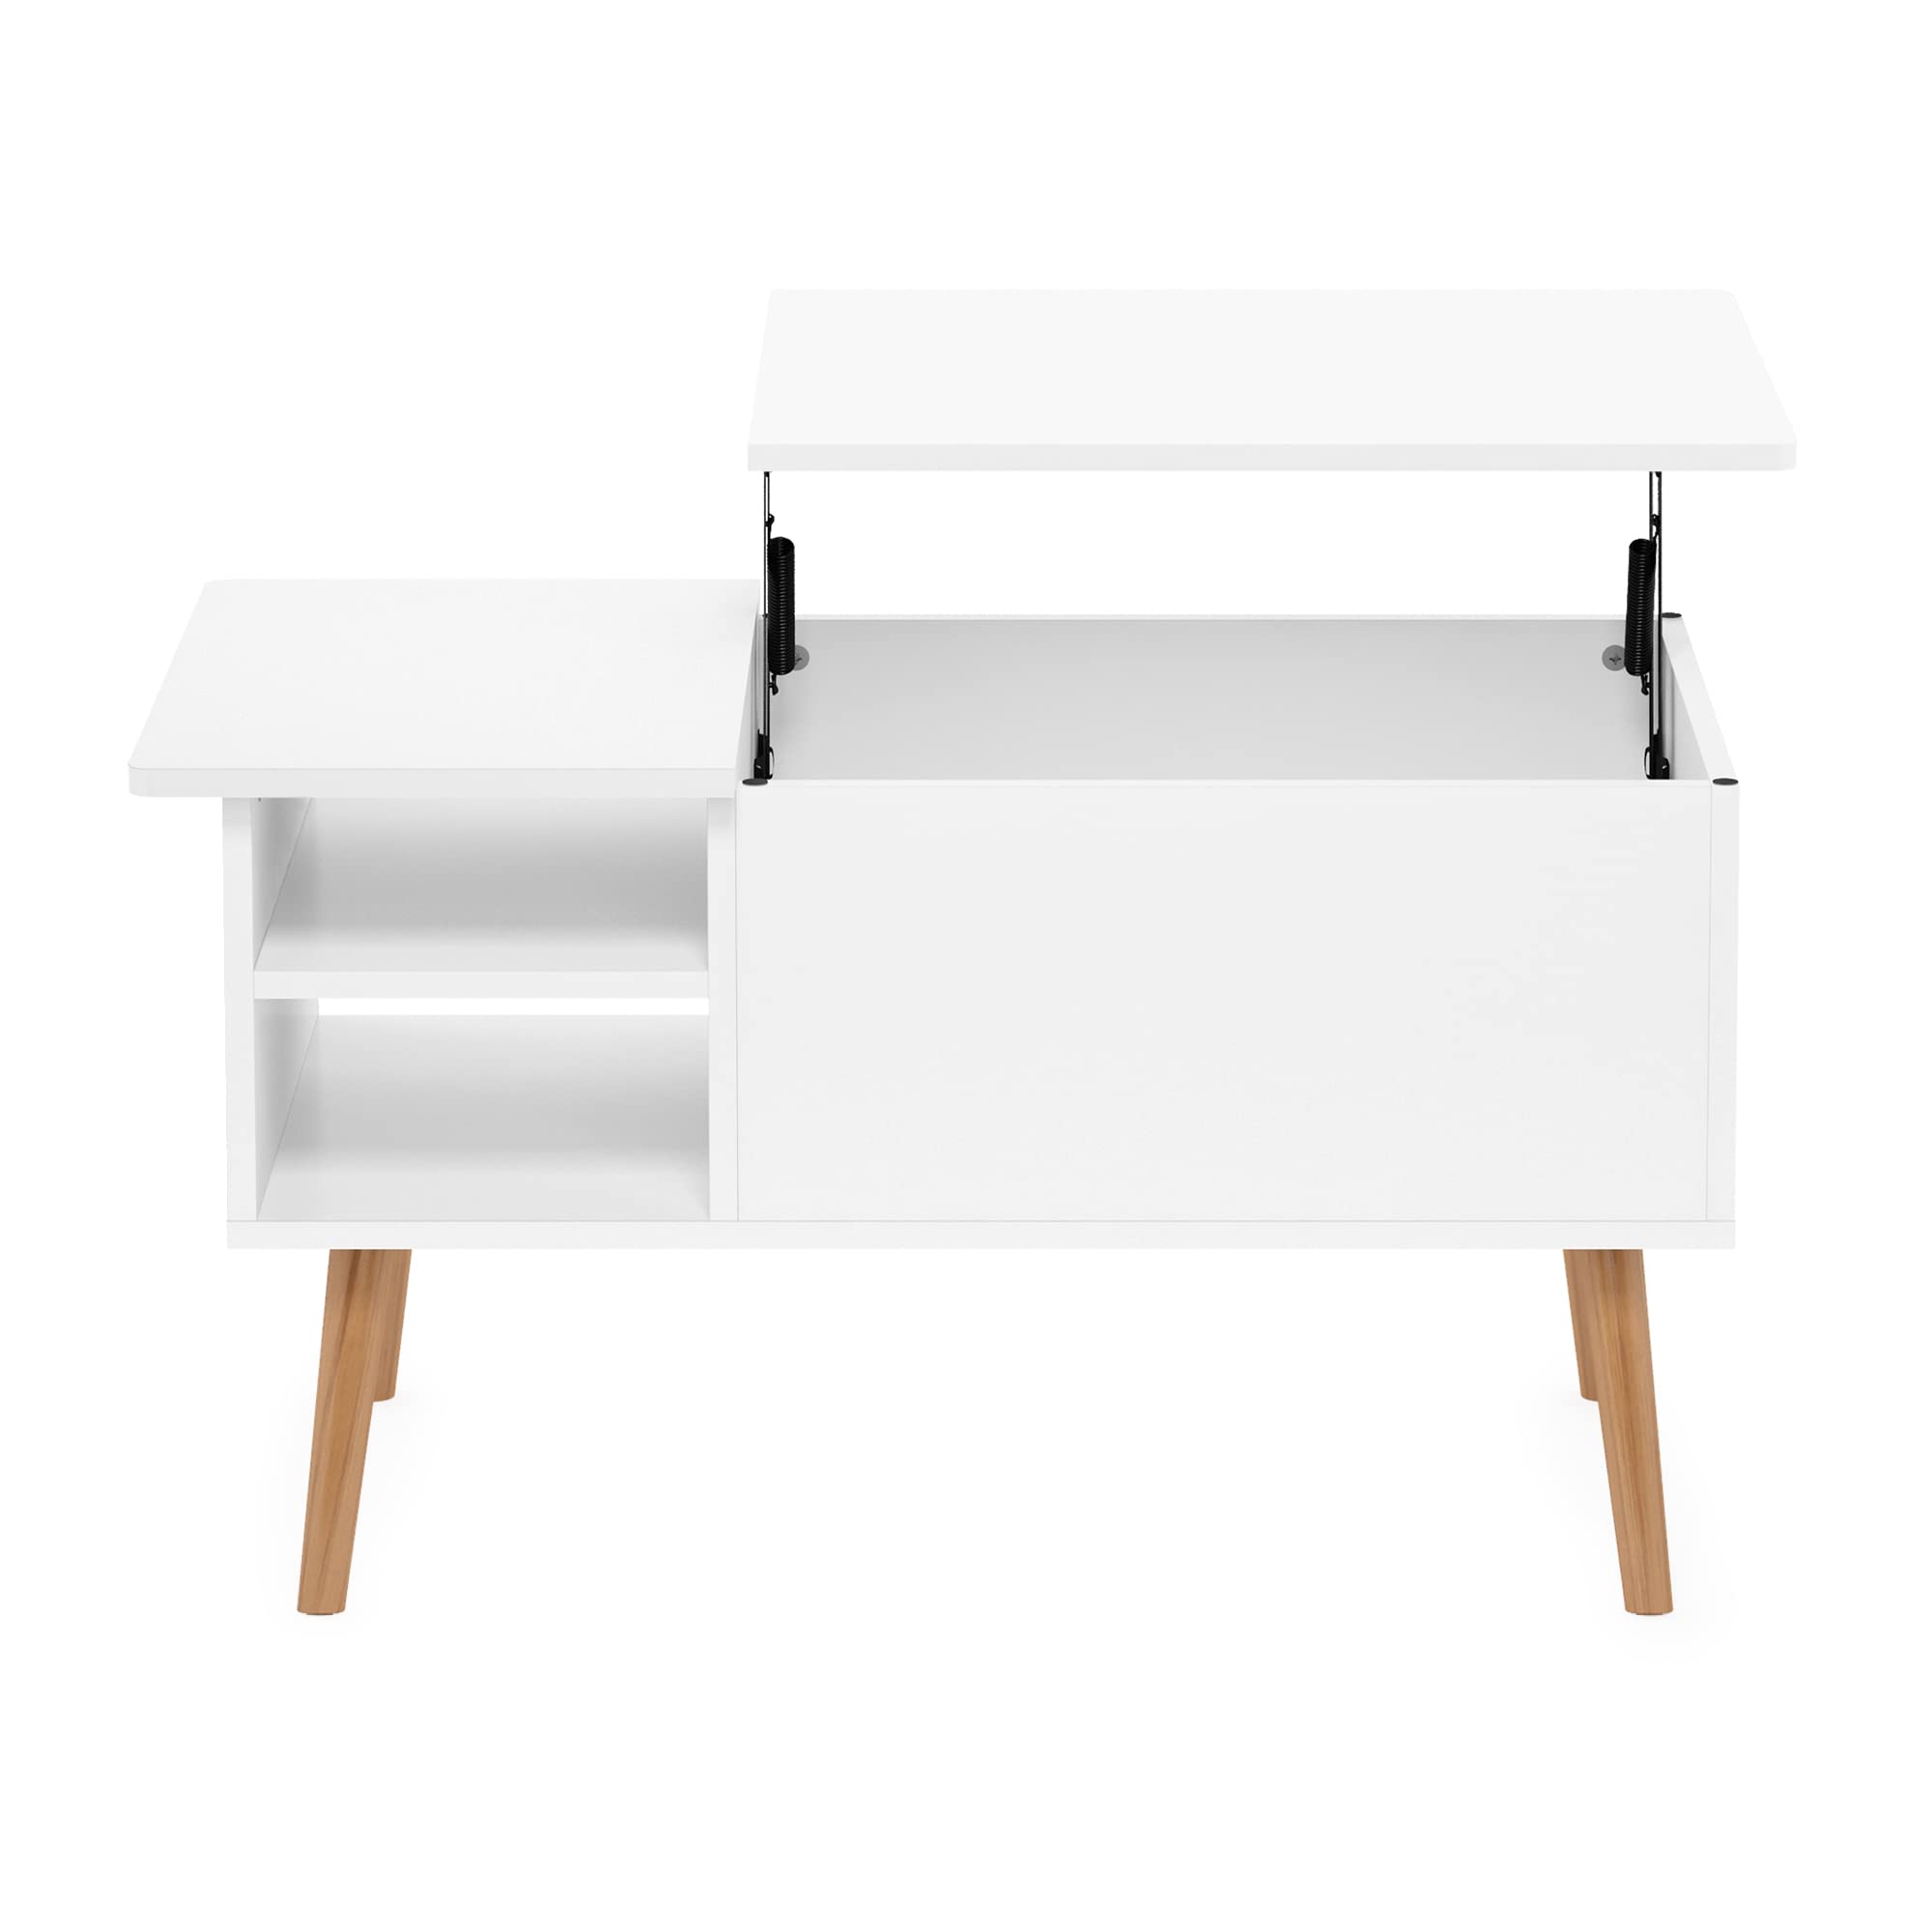 Furinno Jensen Living Room Wooden Leg Lift Top Coffee Table With Hidden Compartment and Side Open Storage Shelf, Solid White